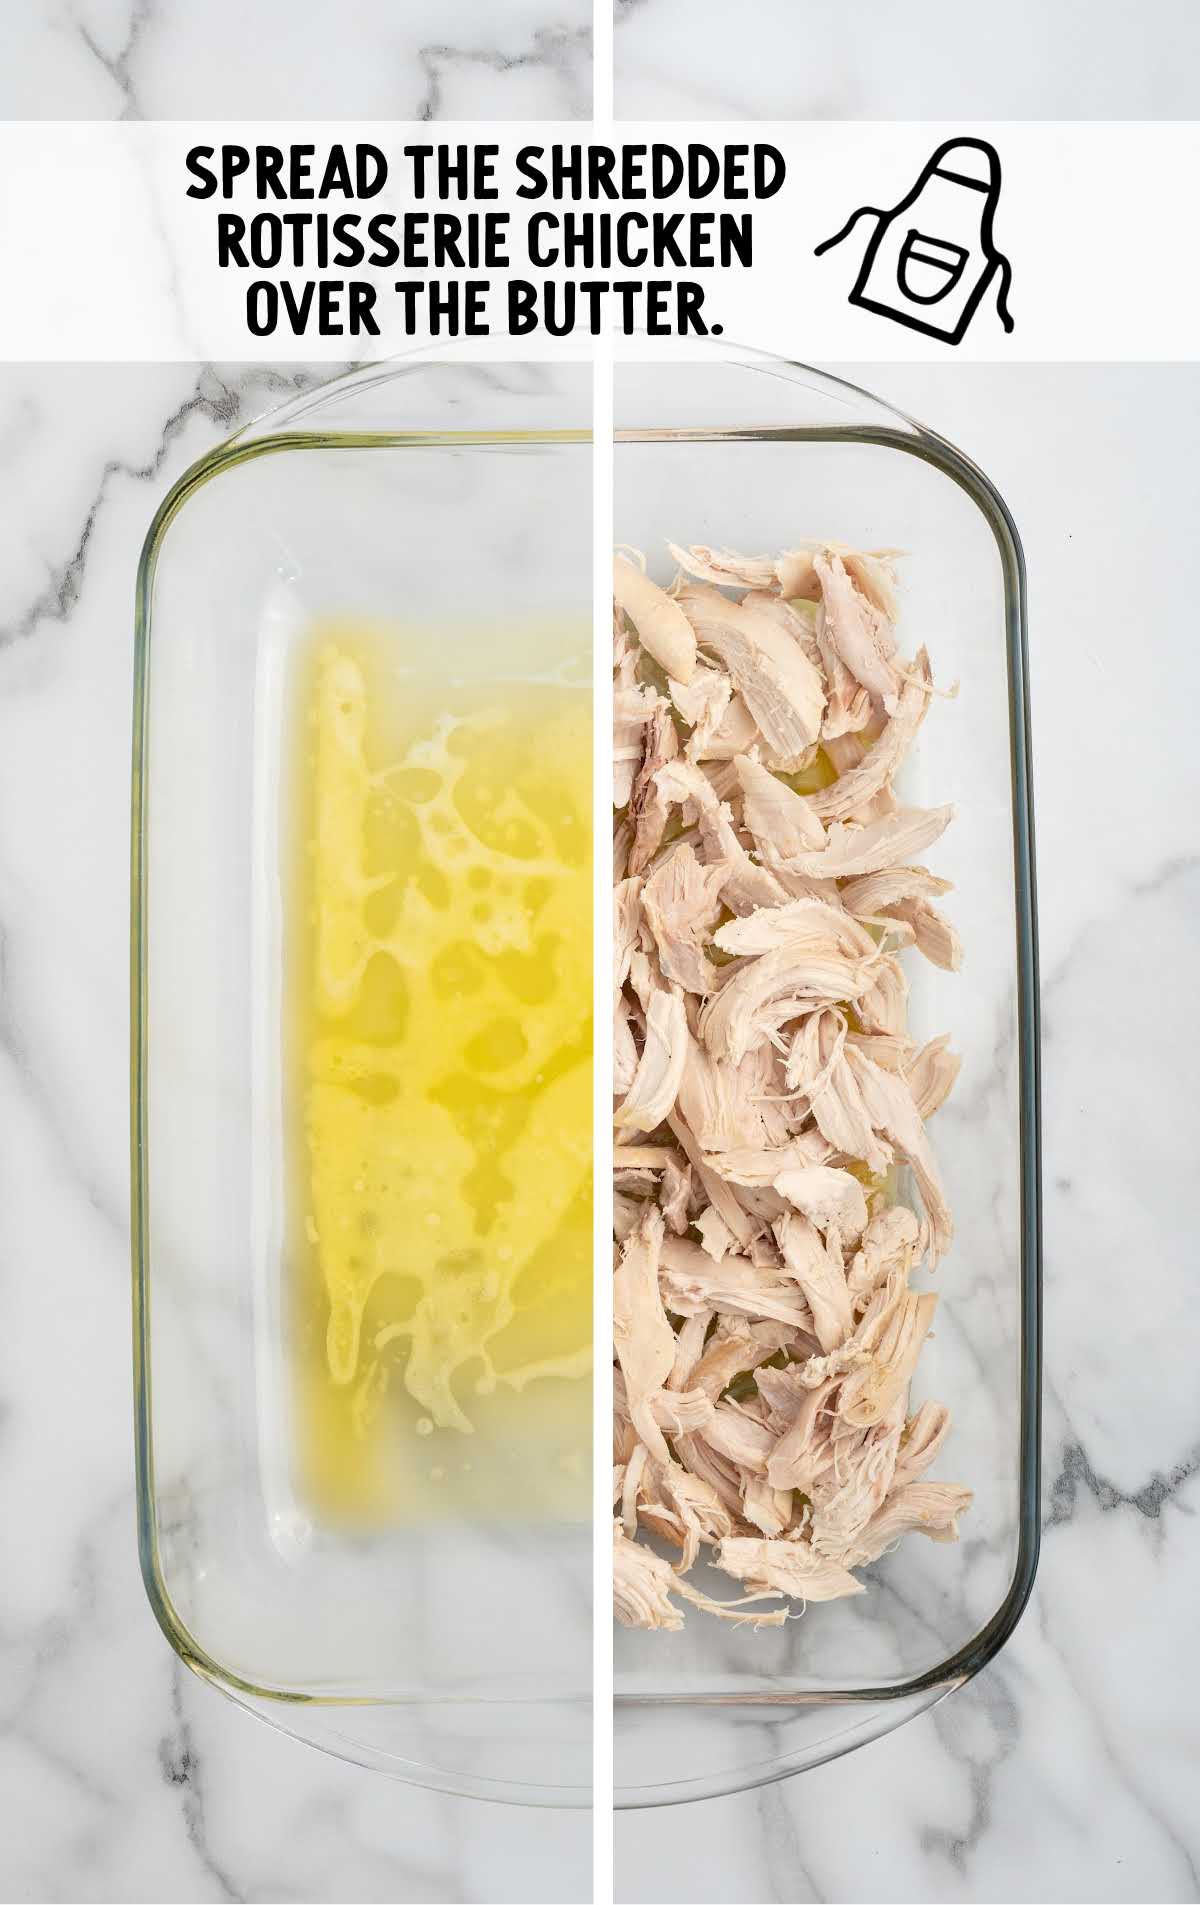 shredded rotisserie chicken spread over the butter in a baking dish